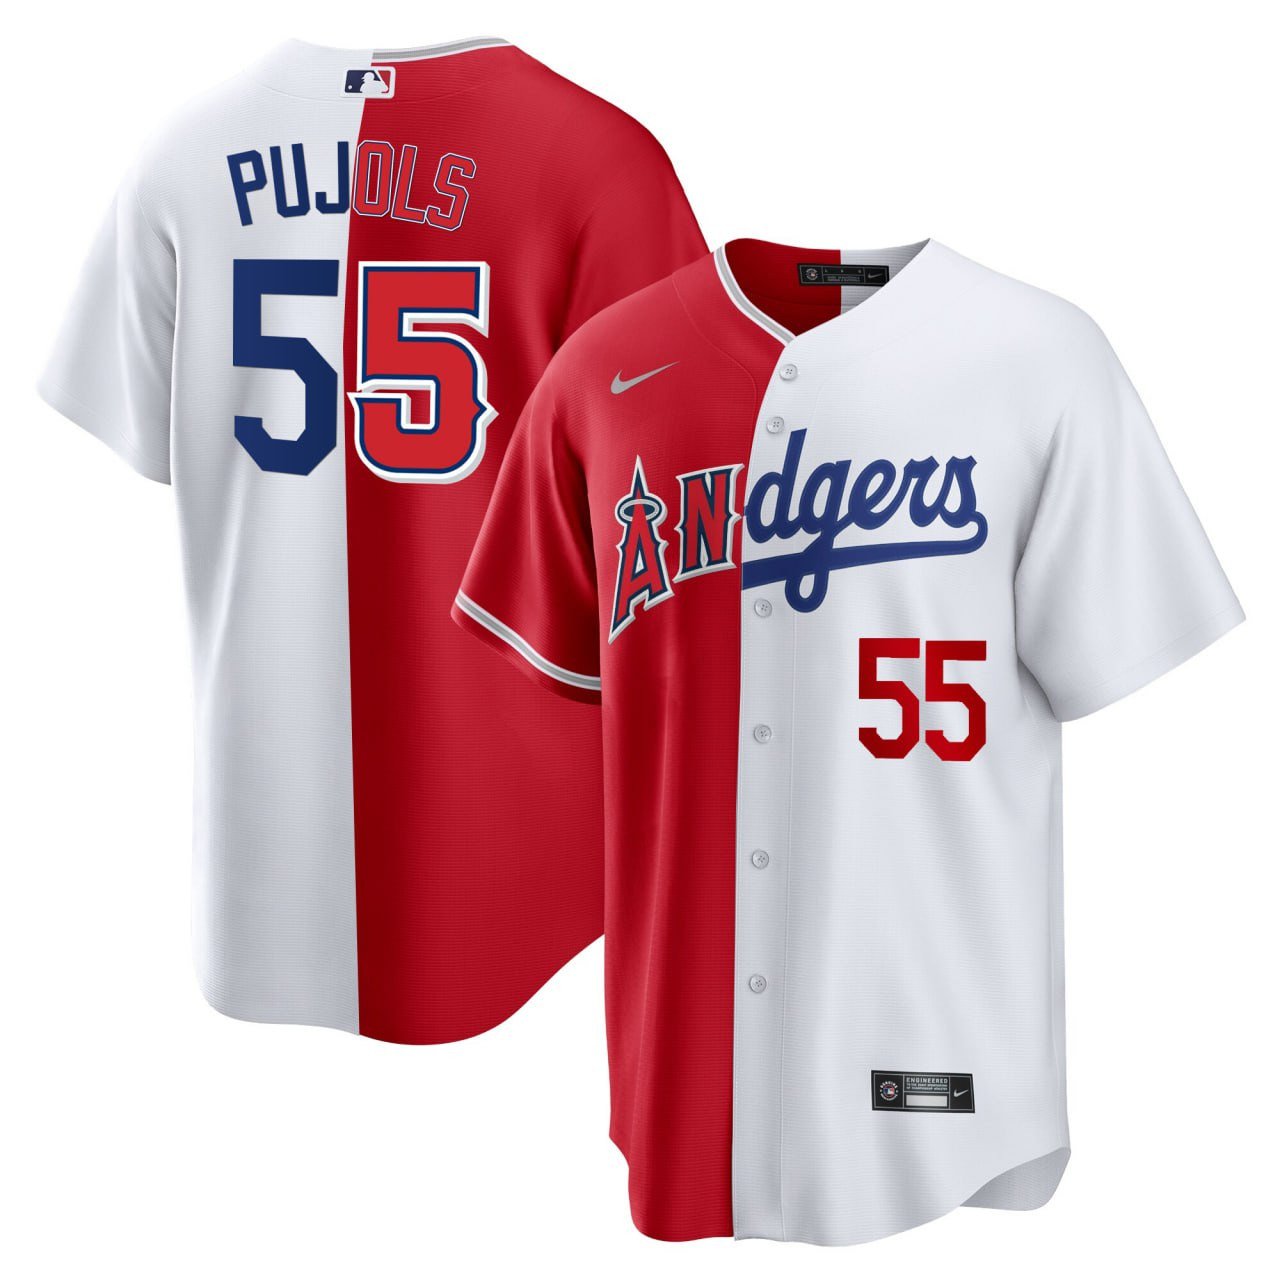 Albert Pujols Split Angels - Dodgers Cool Base Jersey - All Stitched